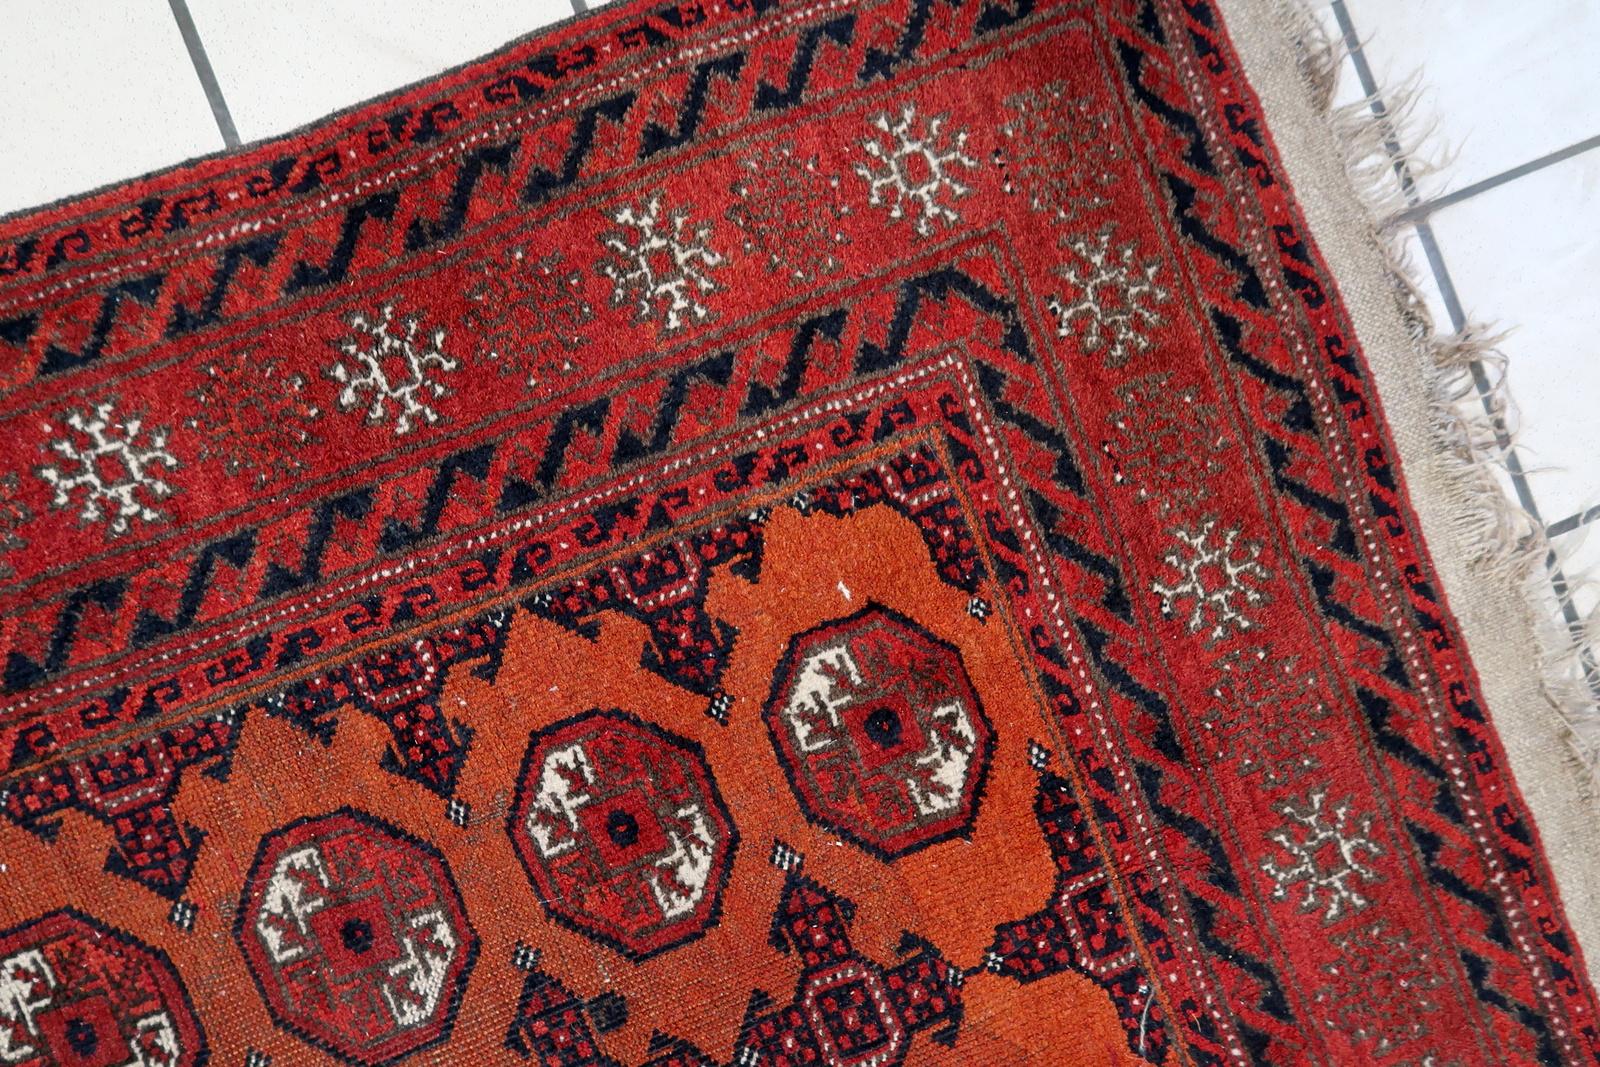 Wool Handmade Antique Afghan Baluch Rug 3.8' x 4.8', 1920s - 1C1141 For Sale